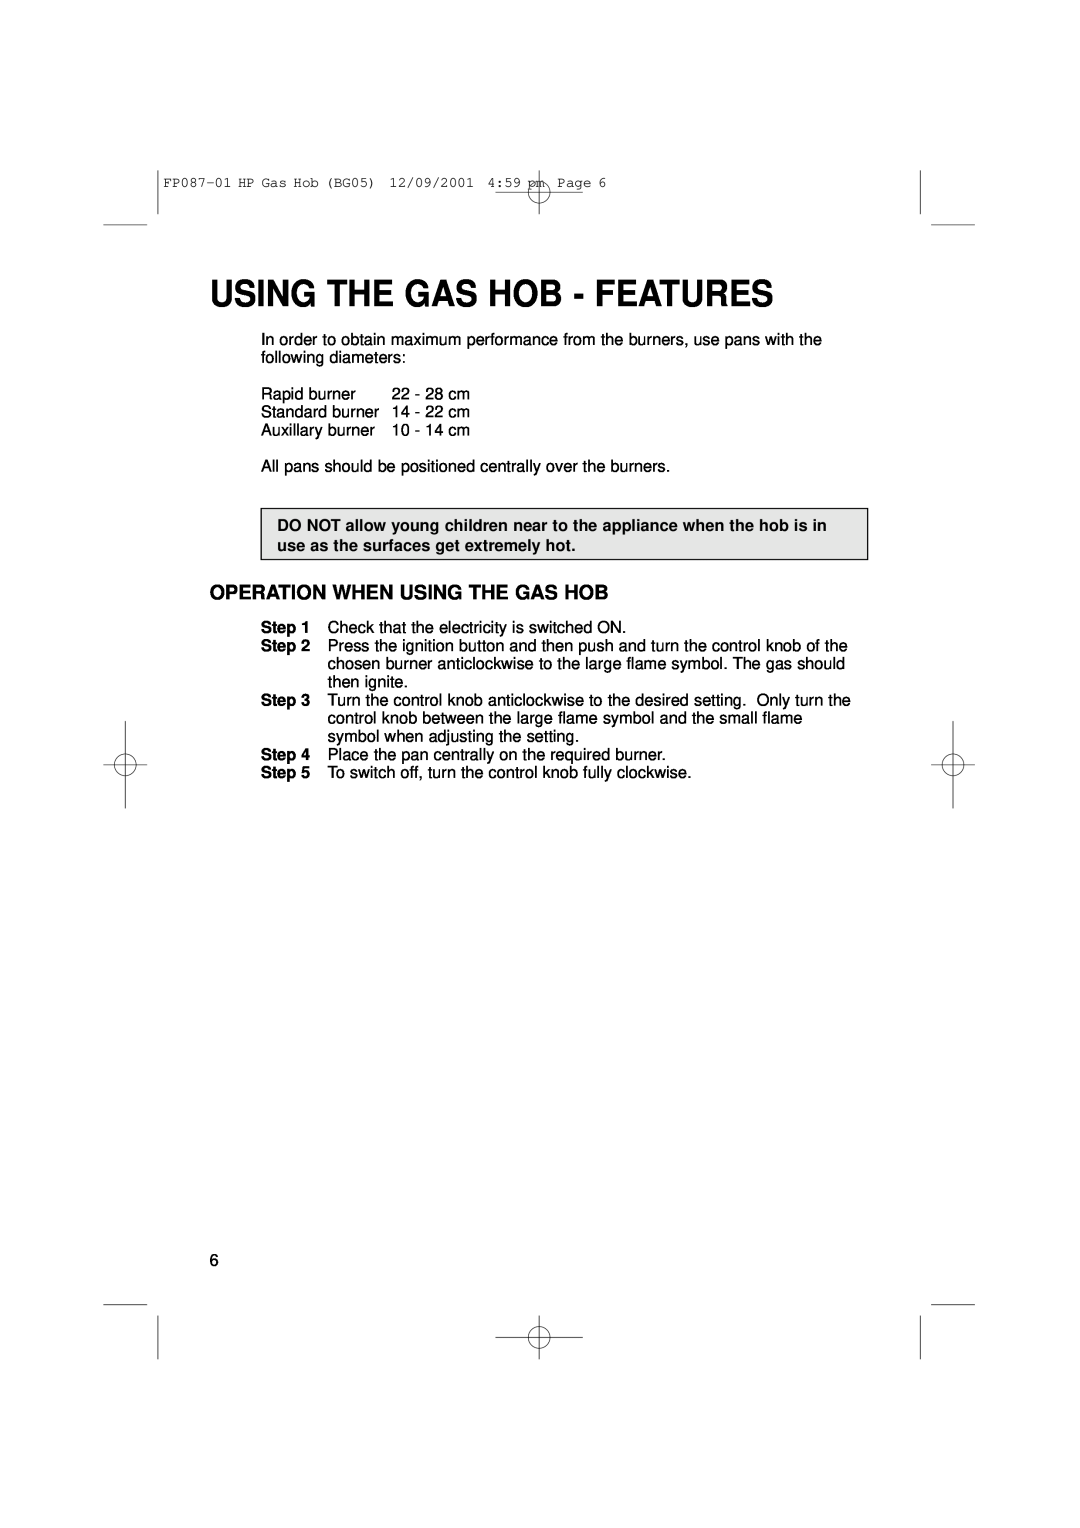 Hotpoint BG05 manual Using The Gas Hob - Features, Operation When Using The Gas Hob 